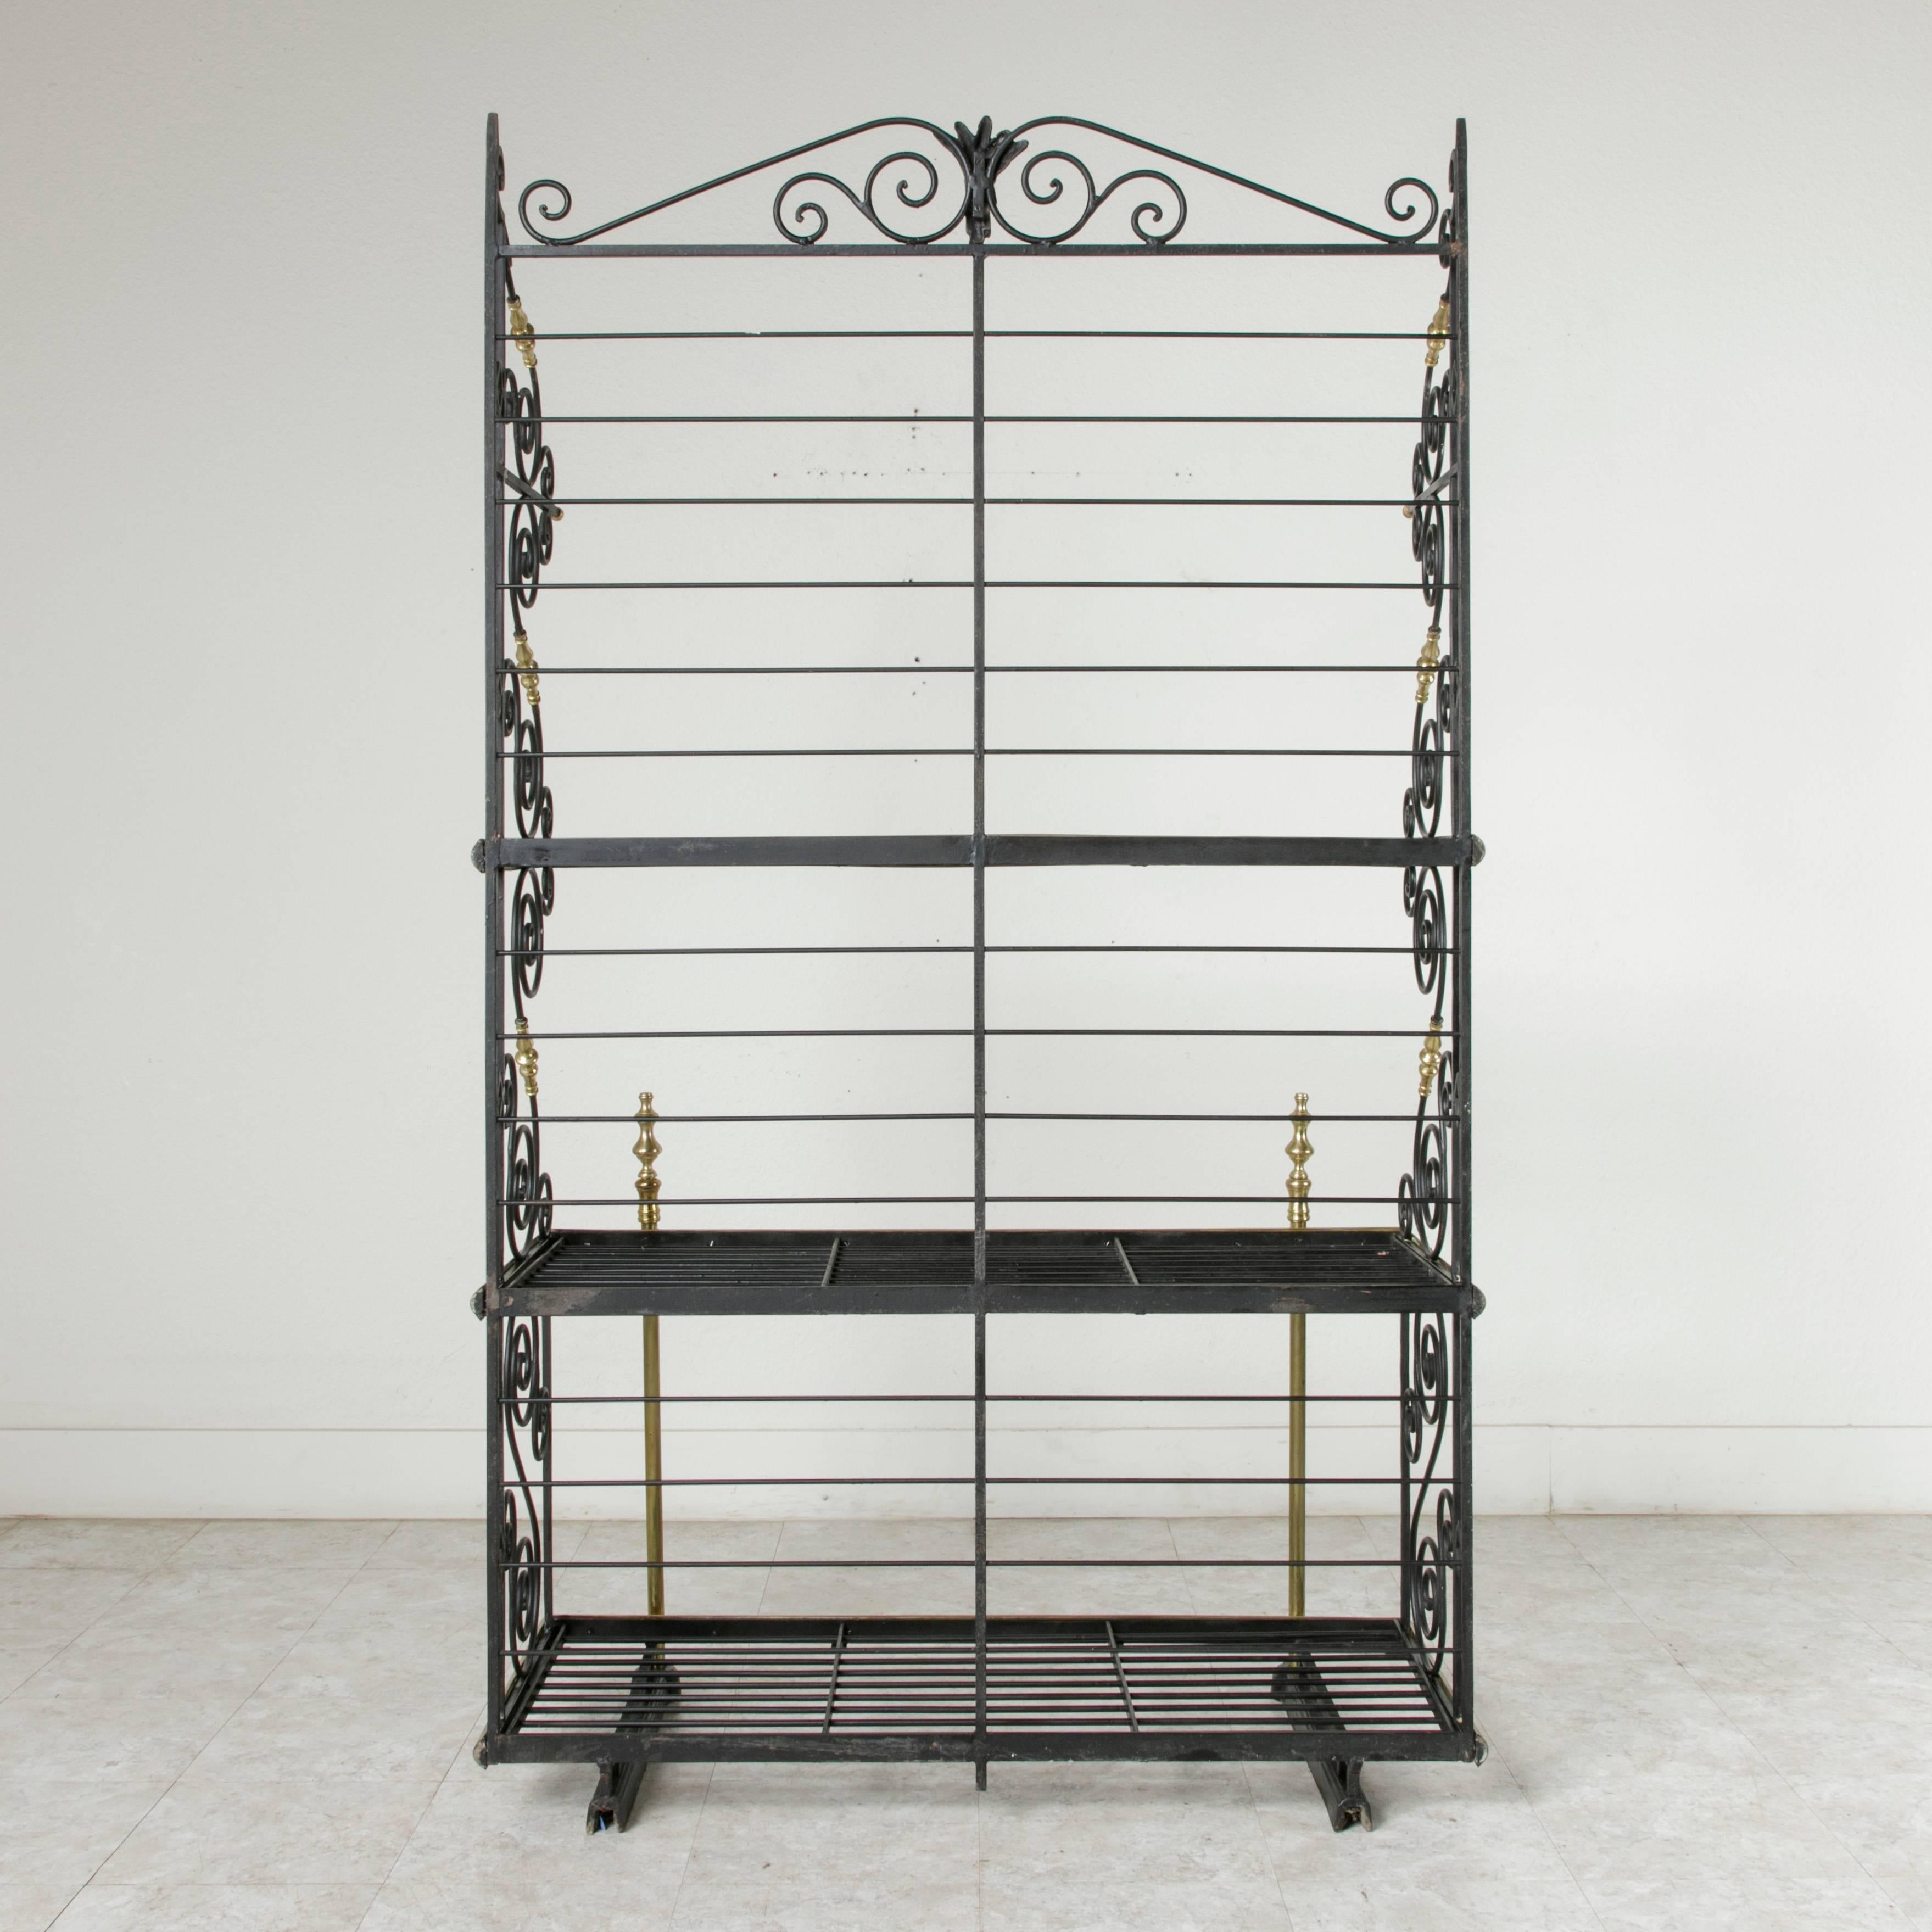 Found in Normandy, this early 20th century baker's rack was originally used in a French bakery. The upper shelf held the long baguettes placed on end or in baskets. Its wrought ironwork features sides of graceful scrolling with hand-hammered tips,